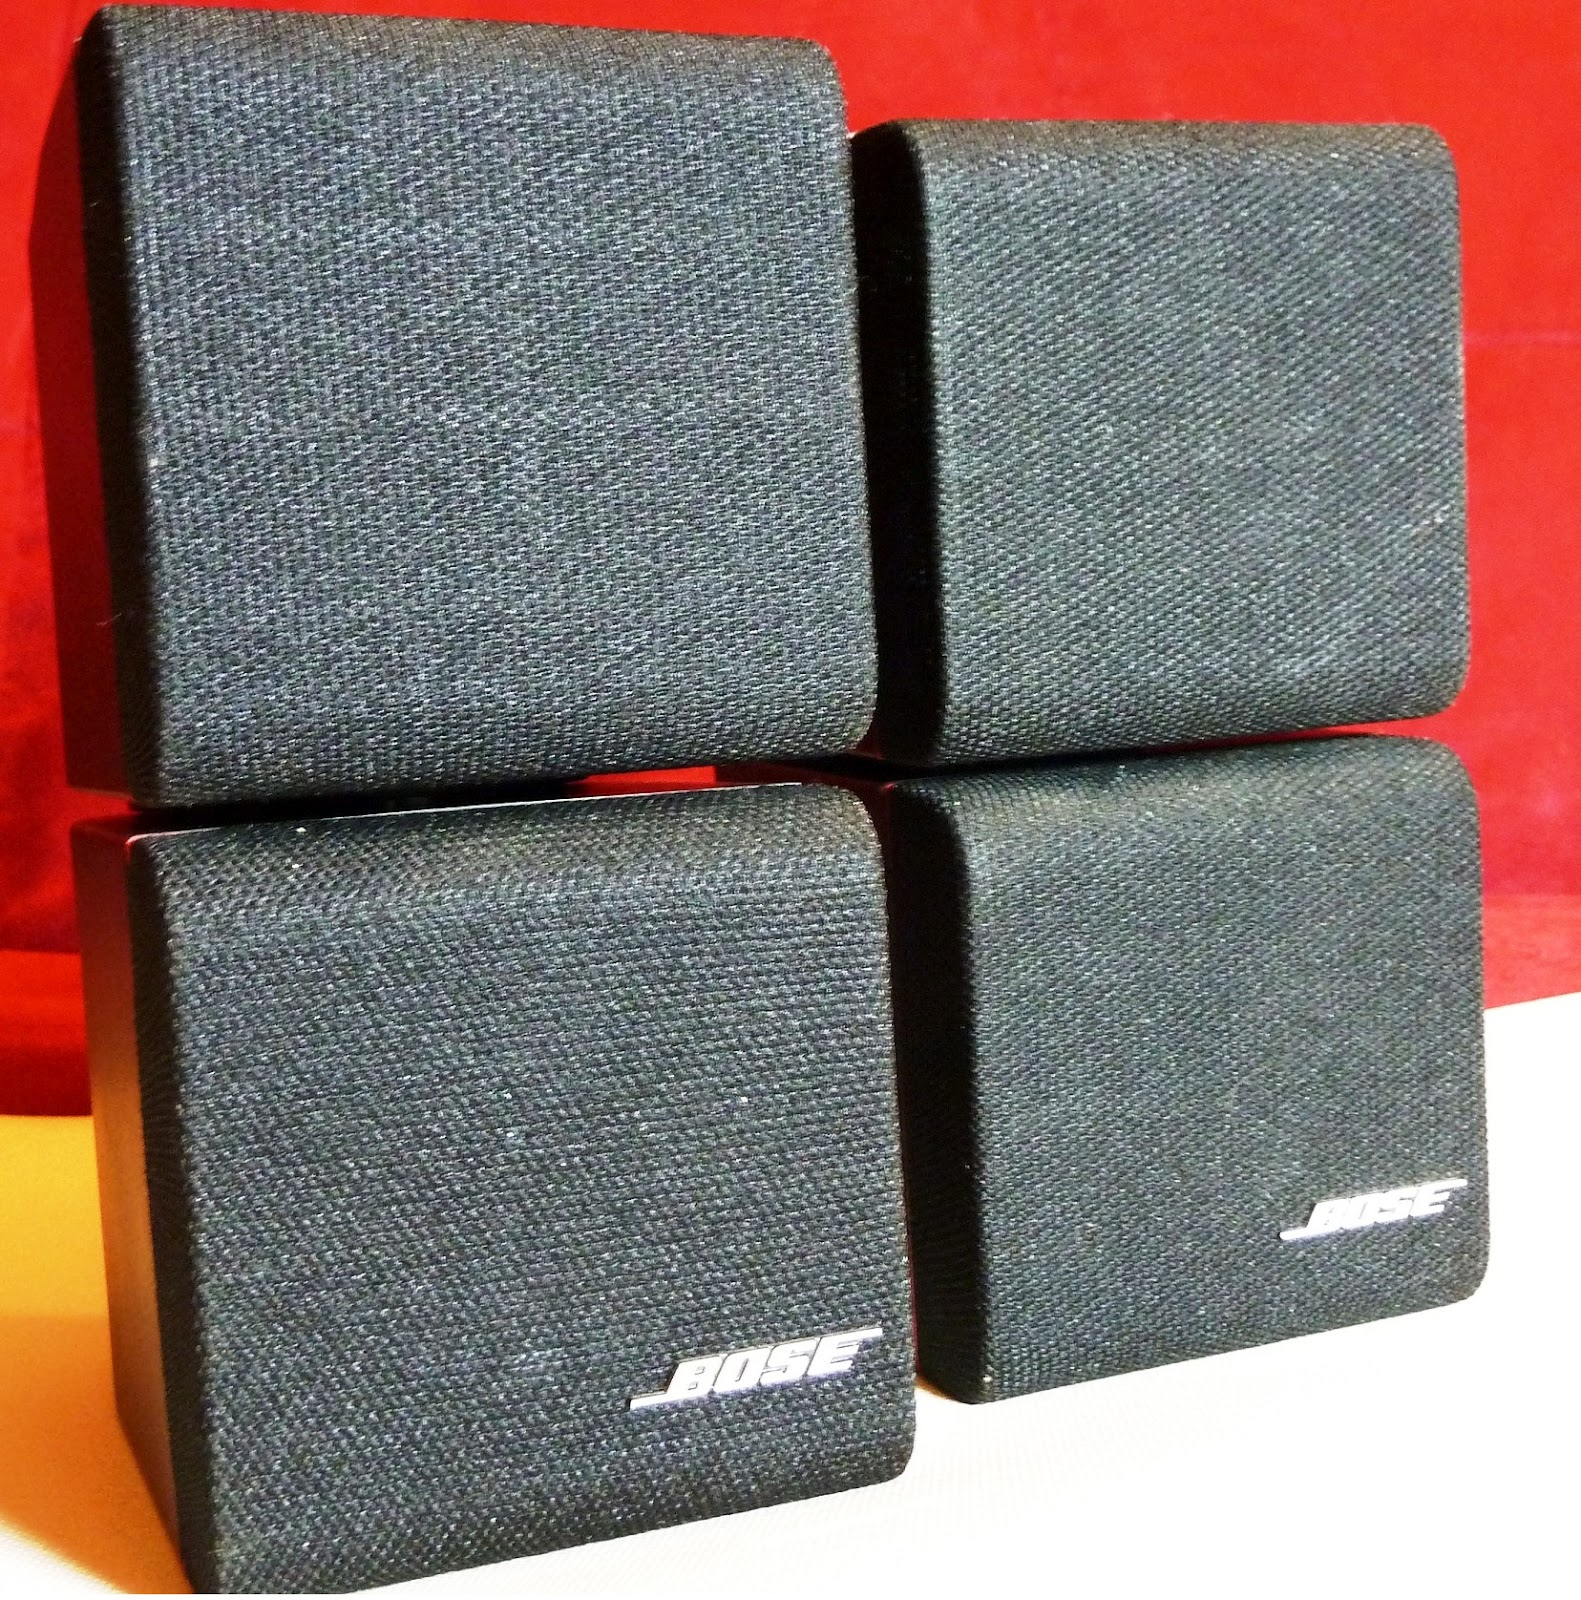 Bose Acoustimass Series 2 Speaker Review, Specs and Price - the Speaker Review